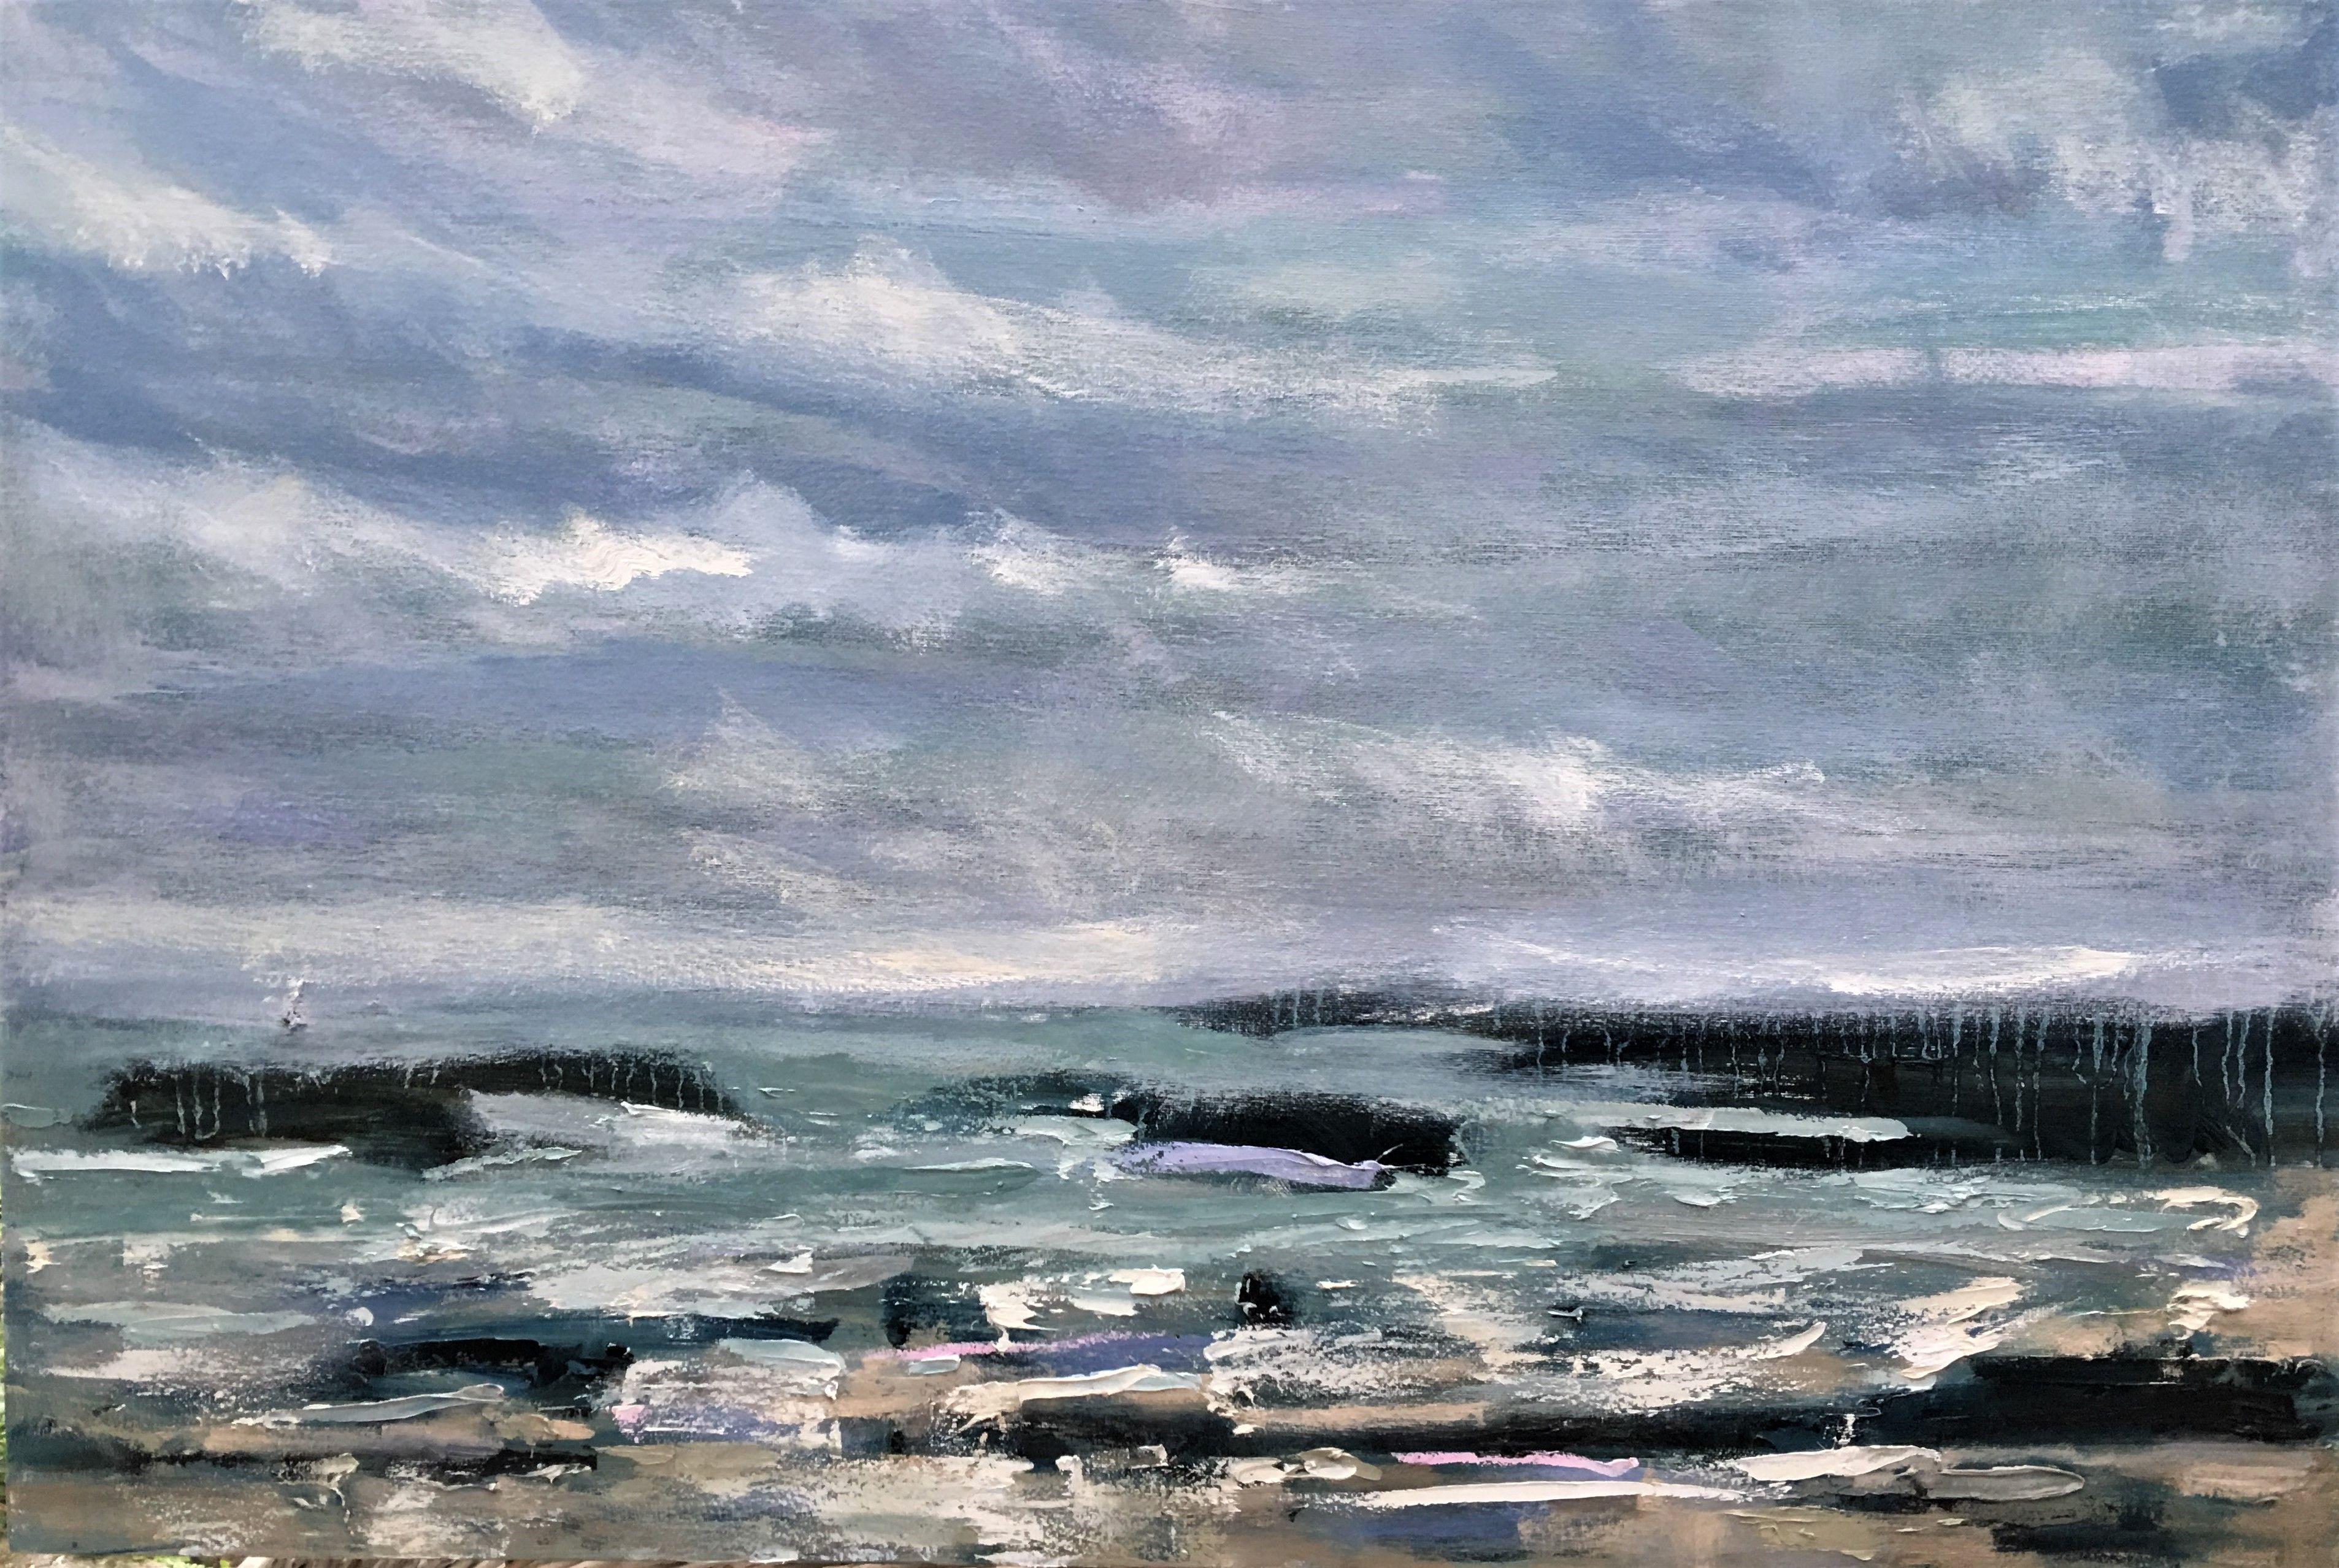 This artwork was created using oil on deep edge box canvas which is ready to hang or can be framed if desired. It is signed on the back, and the sides of the canvas are painted white. The painting is inspired by constant observation of the sea.